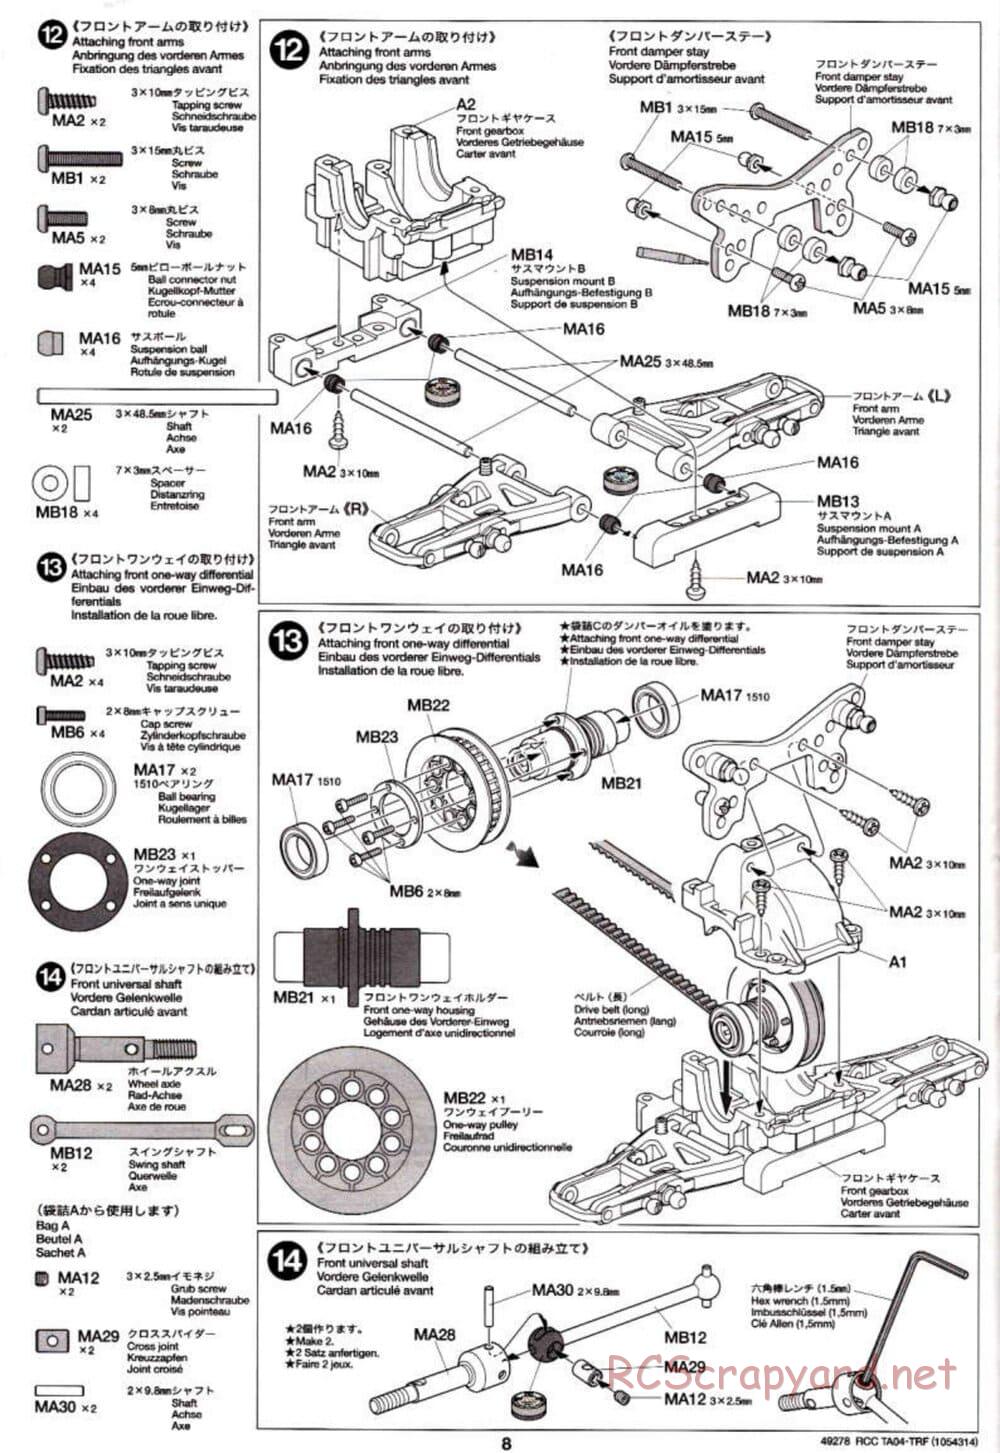 Tamiya - TA-04 TRF Special Chassis Chassis - Manual - Page 8